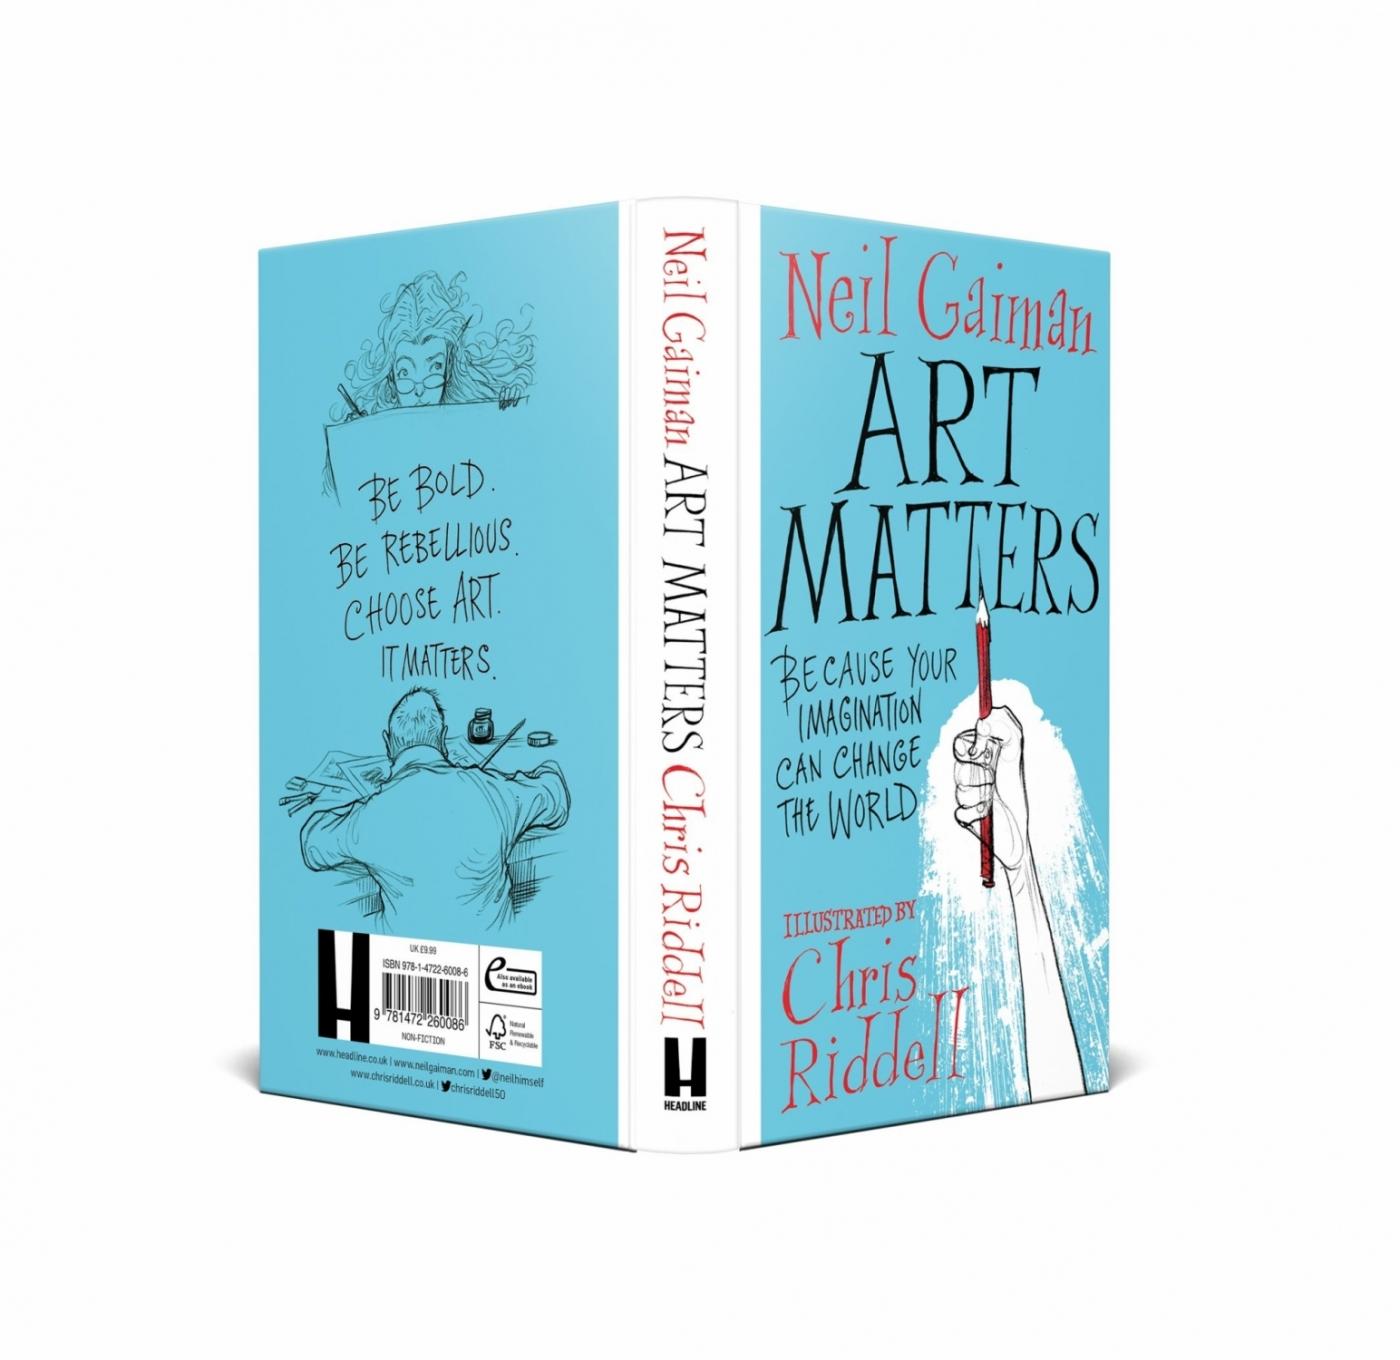 The book cover of Art Matters by Neil Gaiman. by .